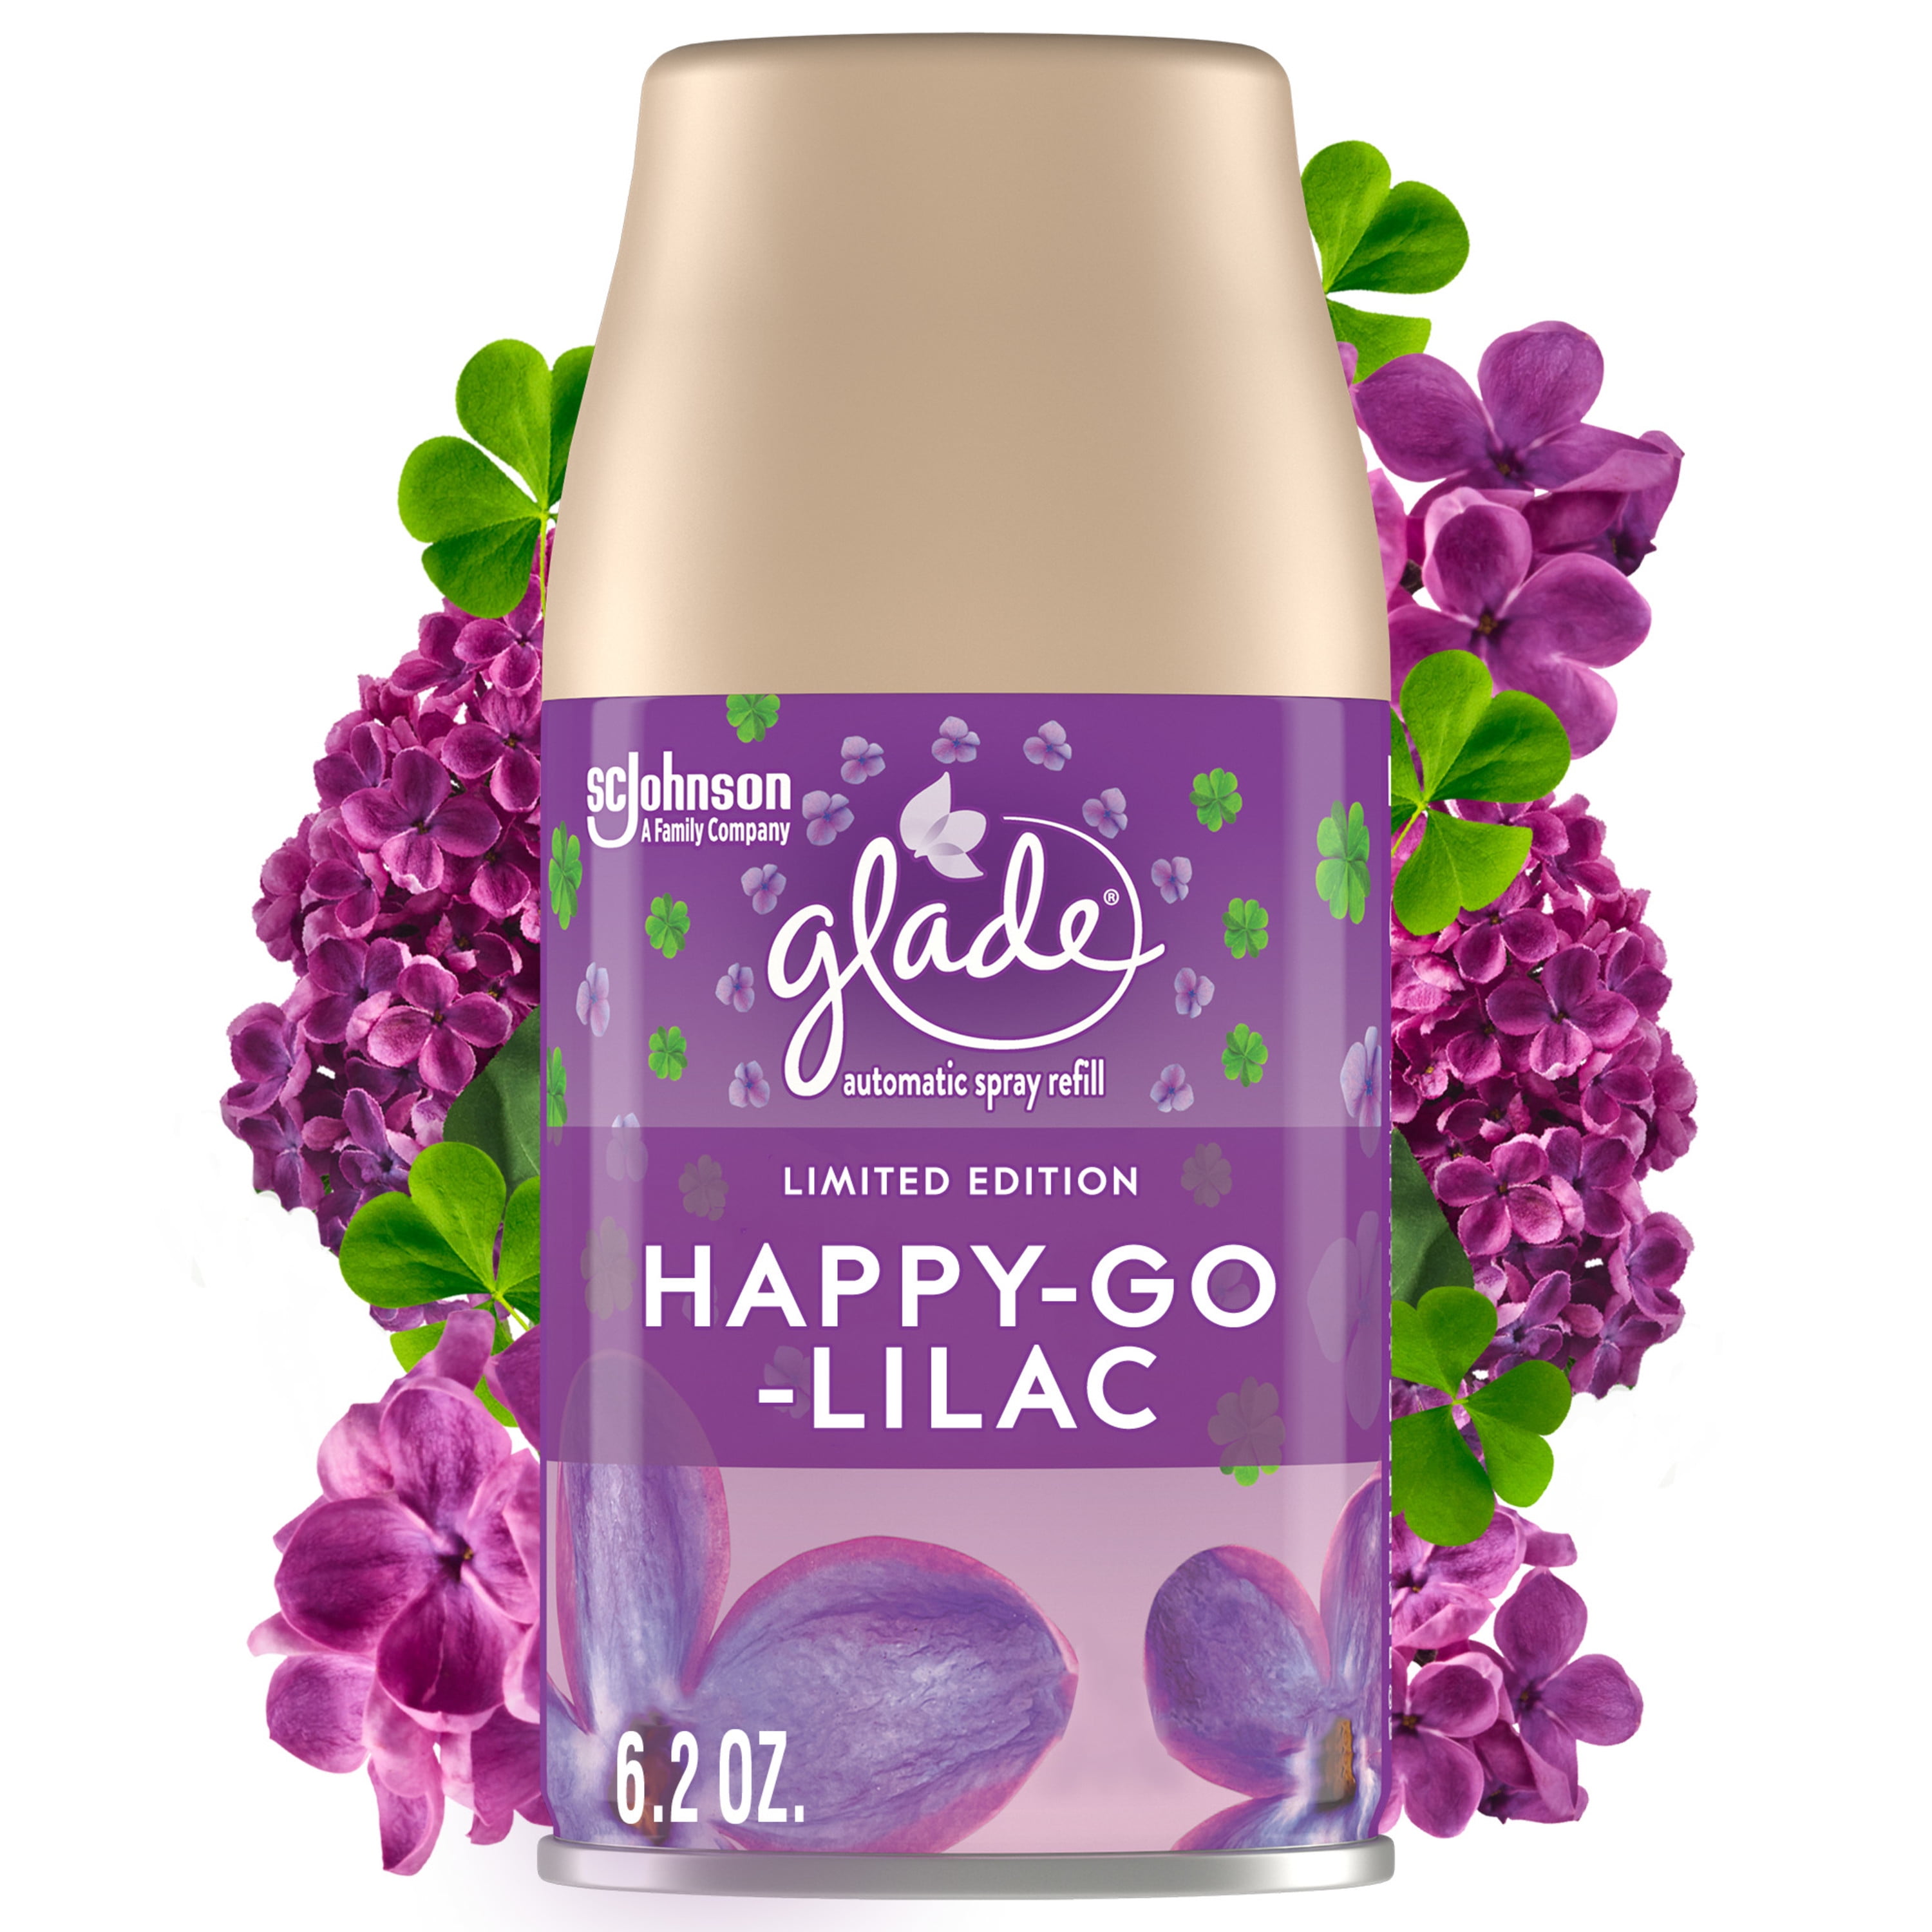 Glade Automatic Spray Refill, Automatic Air Freshener, Happy-Go-Lilac  Scent, Infused with Essential Oils, Spring Limited Edition Fragrance,  Positive Vibes Collection, 6.2 Oz 